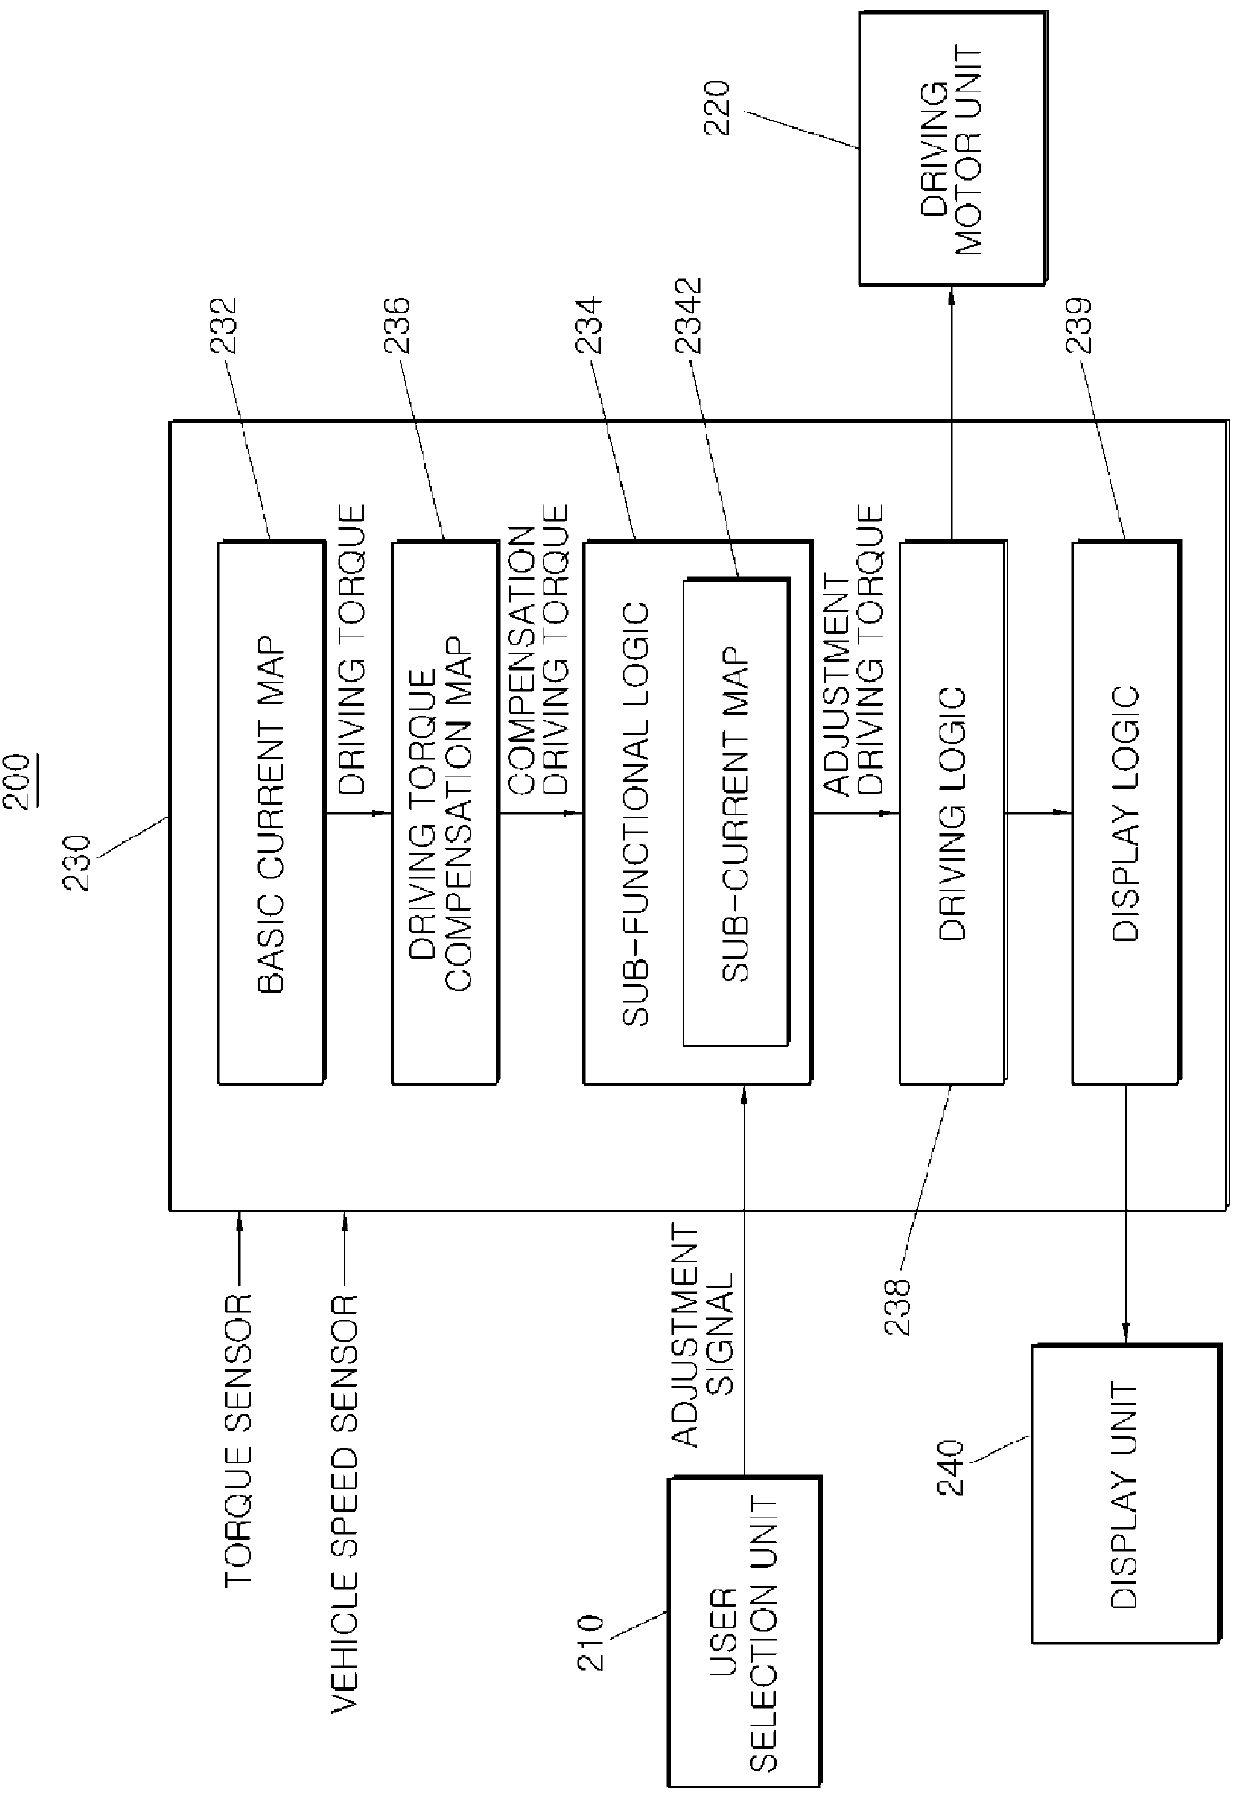 Motor driven power steering tunable by user